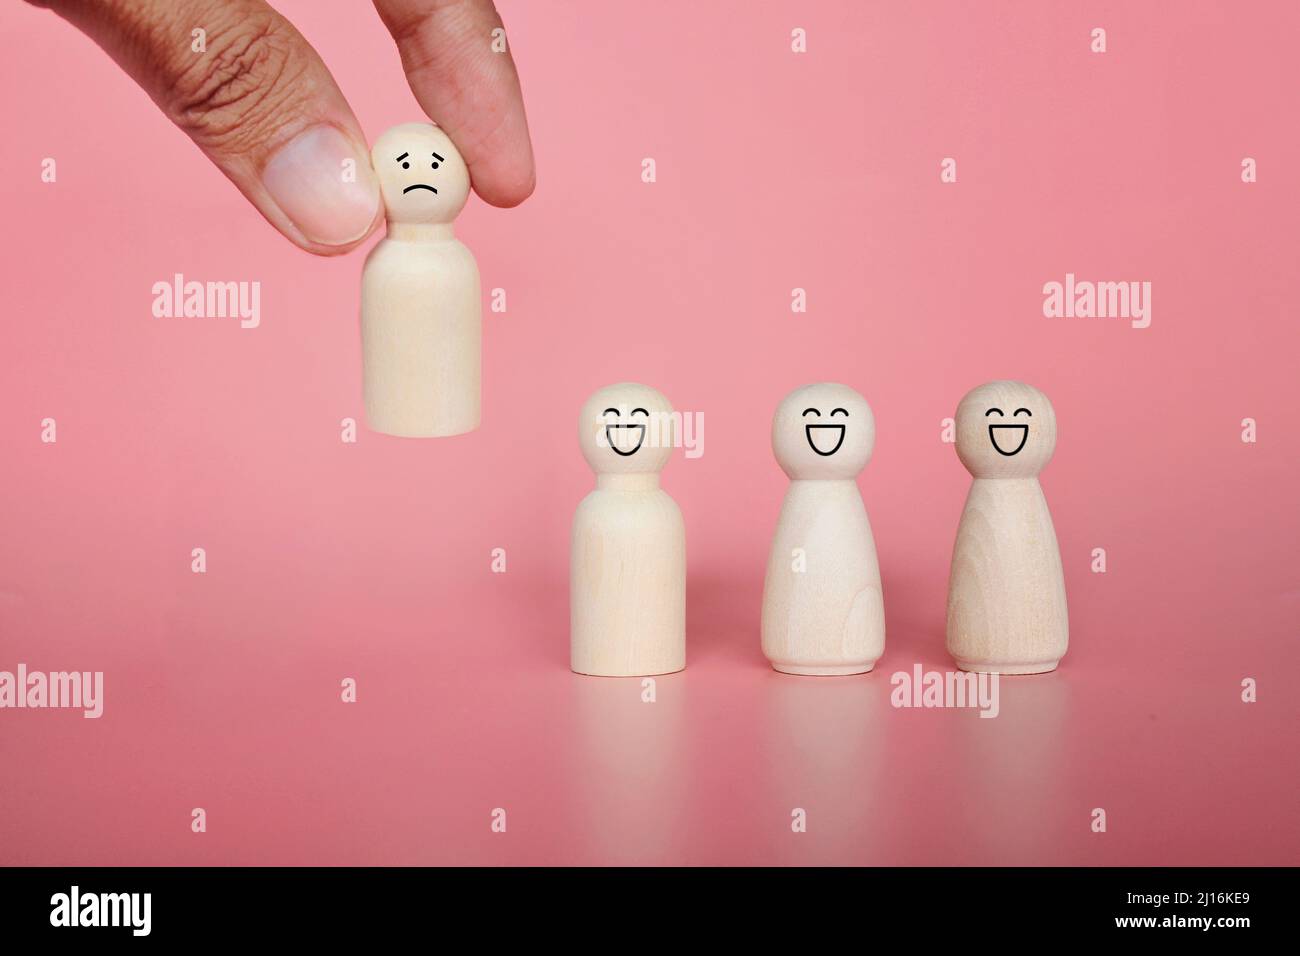 Firing, bad employee and demotion concept. Hand pick wooden doll with sad face icon. Pink background Stock Photo